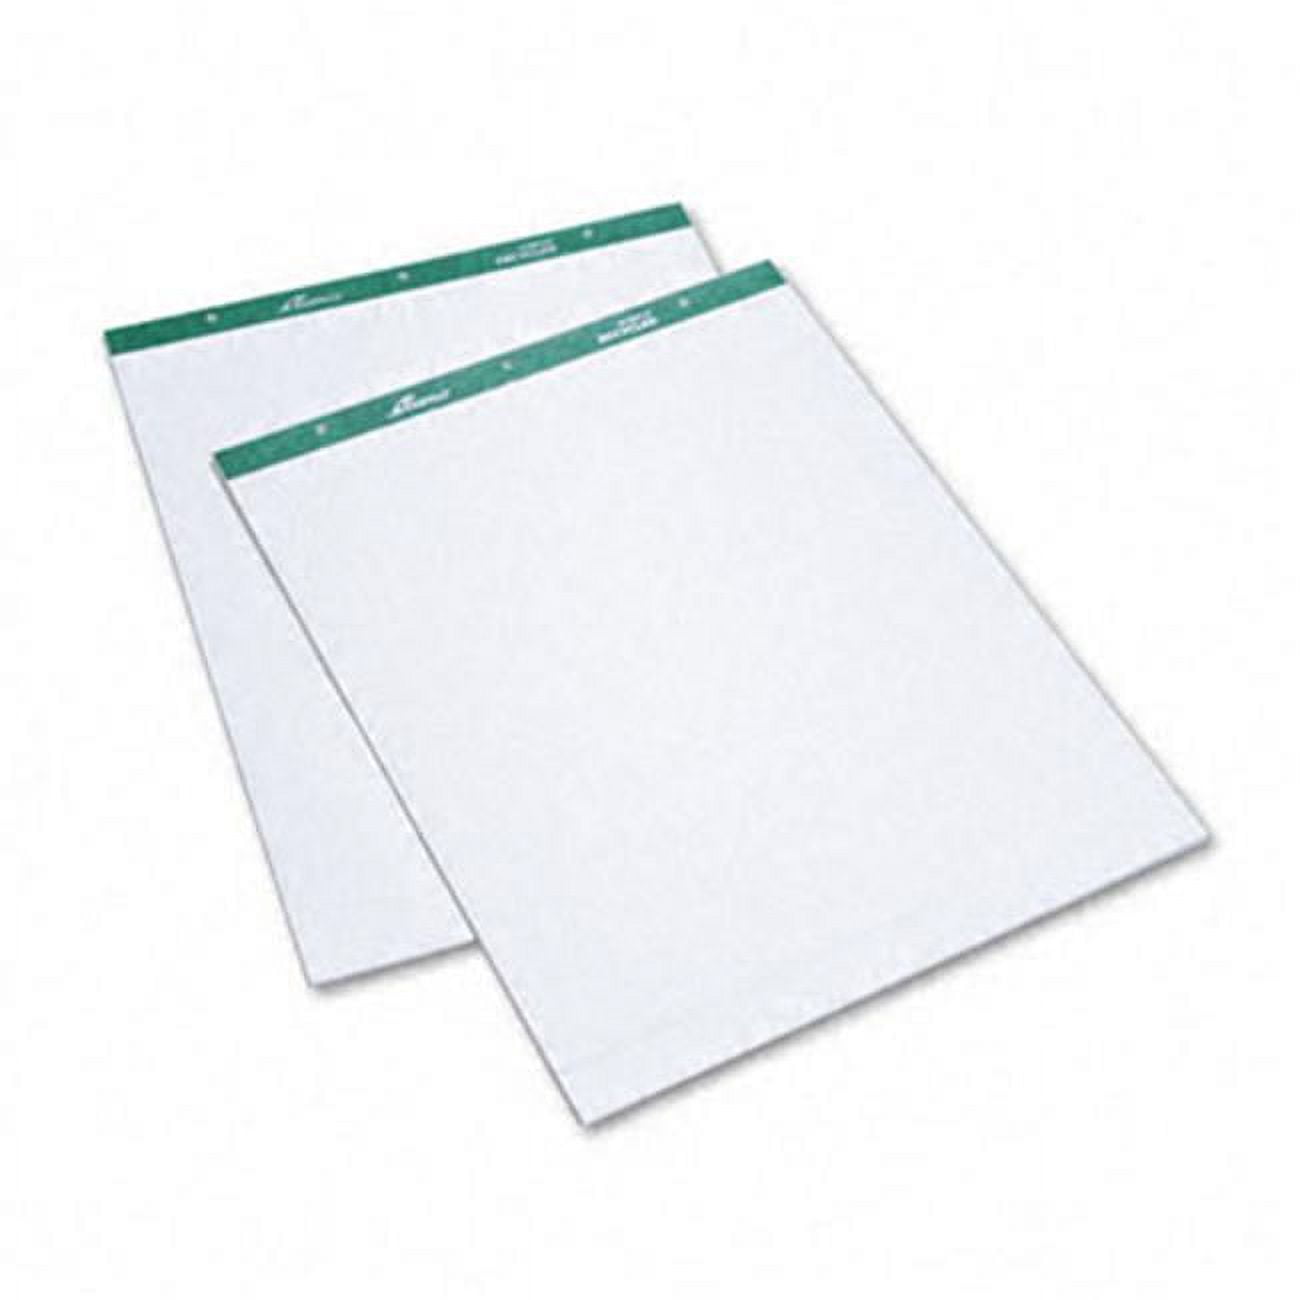 Universal Recycled Easel Pads Quadrille Rule 27 x 34 White 50-Sheet 2/CTN